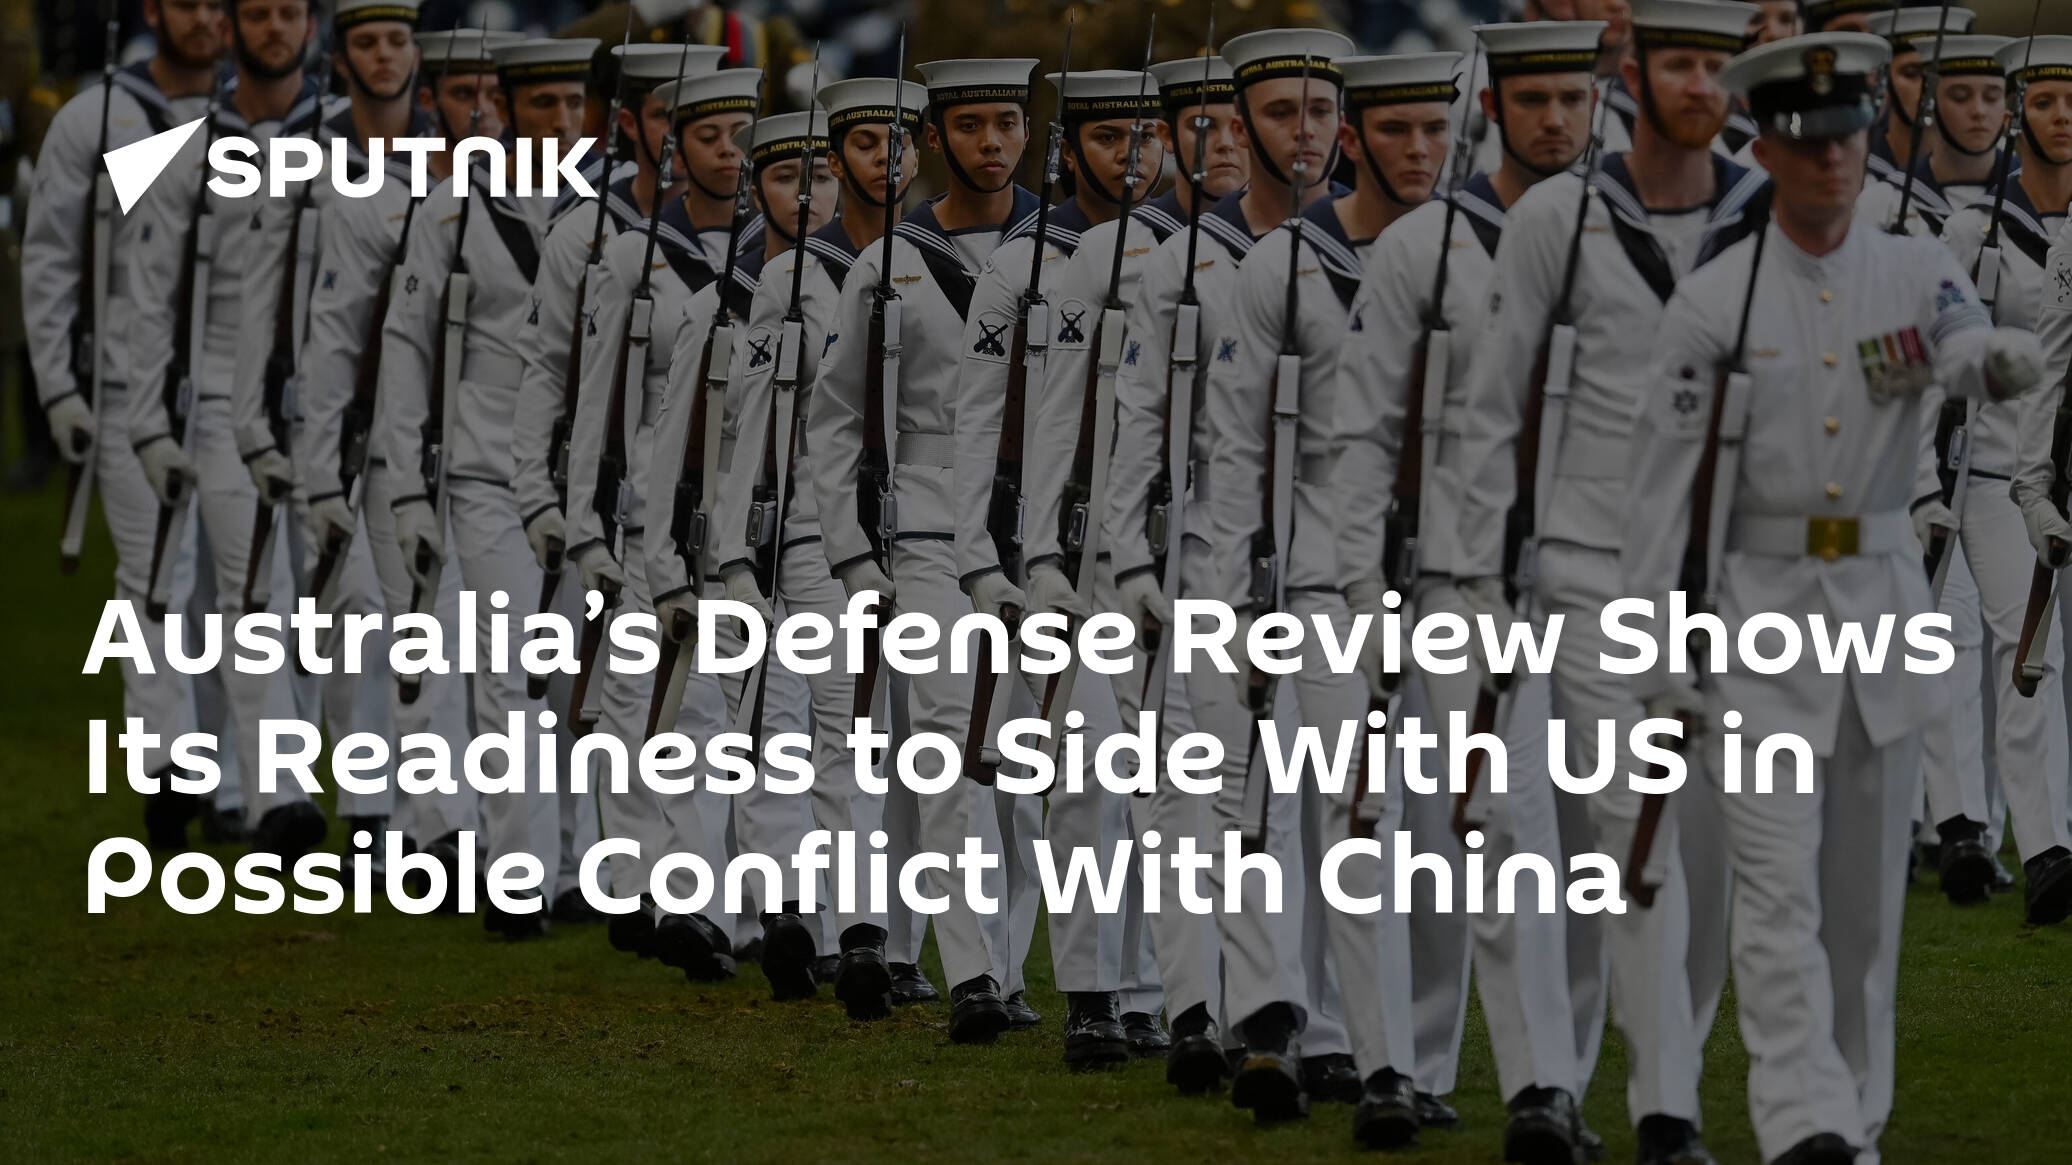 Australia’s Defense Review Shows Its Readiness to Side With US in Possible Conflict With China